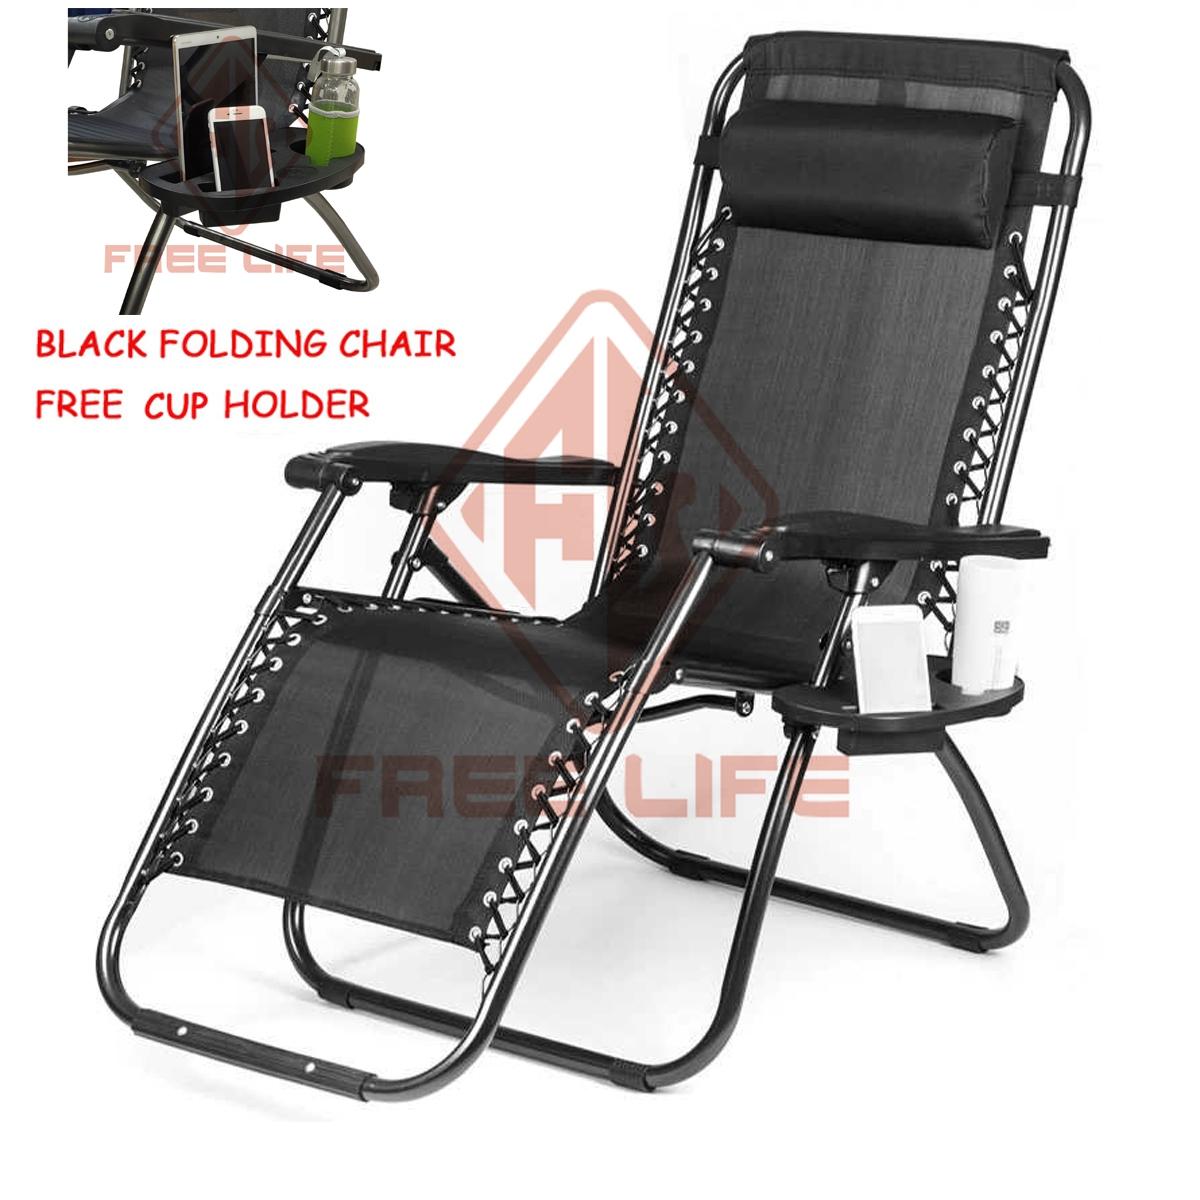 FREE LIFE Folding chair folding bed 